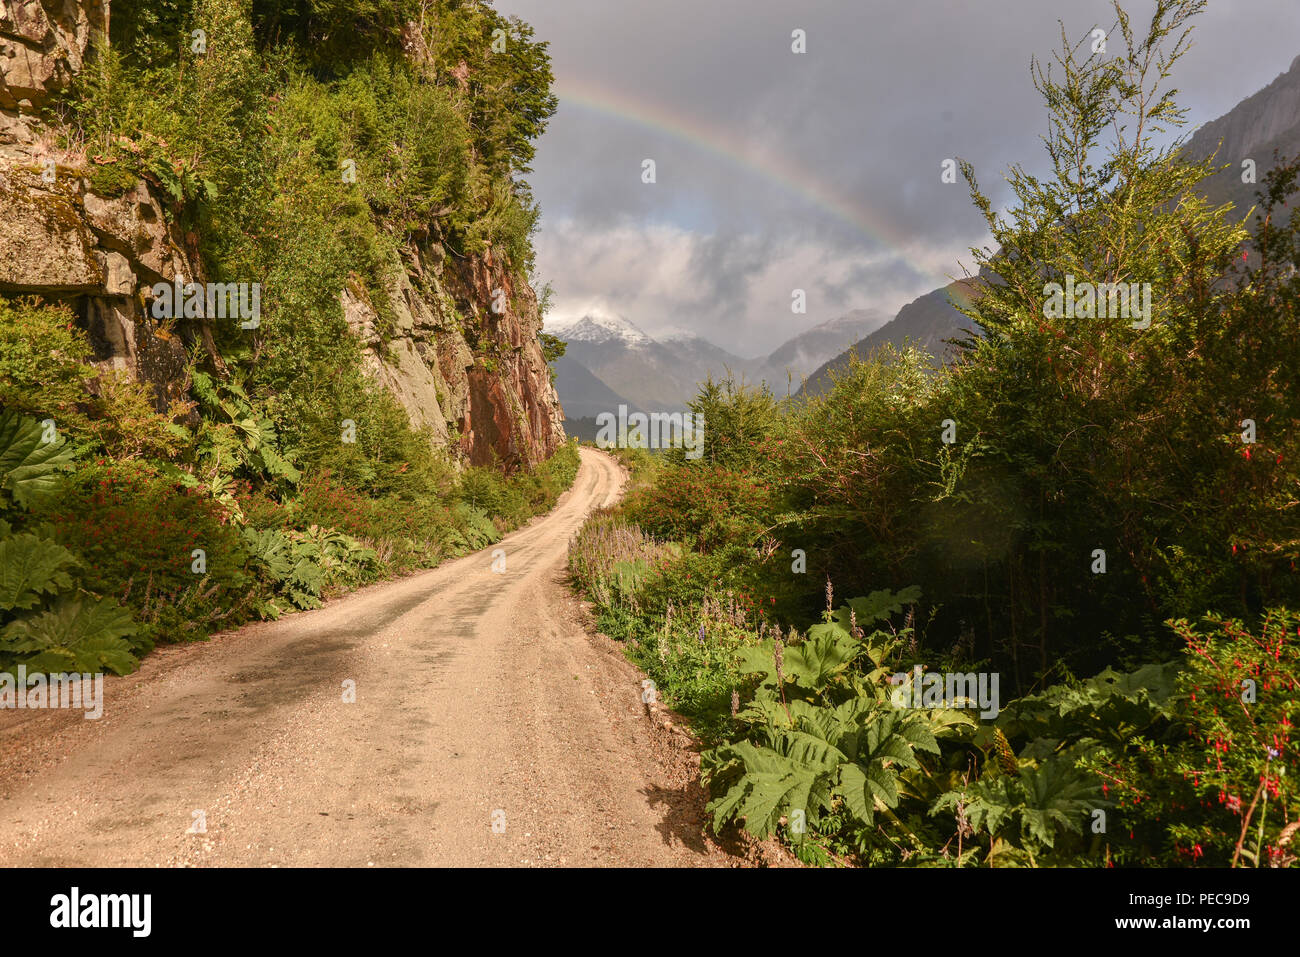 Gravel road with rainbow at Puerto Río Tranquilo, Carretera Austral, Valle Exploradores, Patagonia, Chile Stock Photo